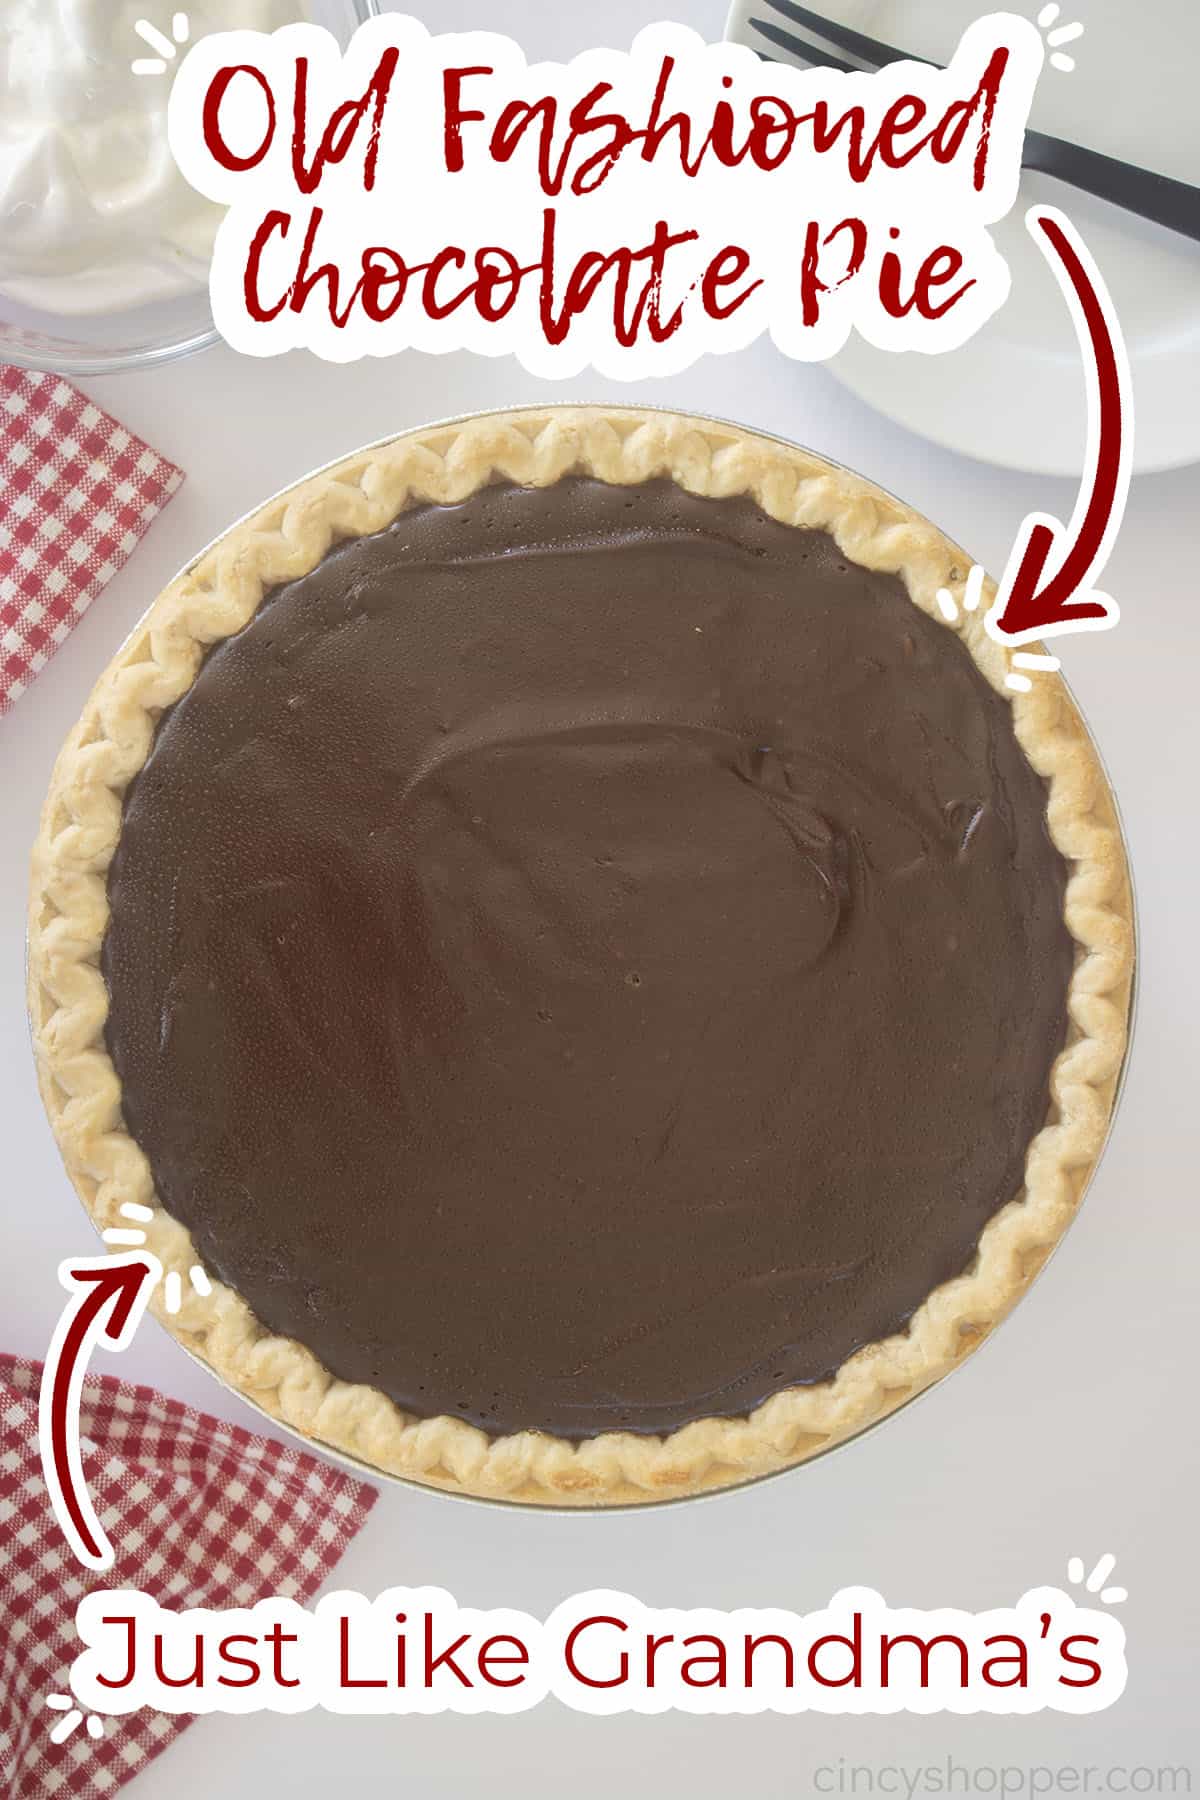 Text on image Old Fashioned Chocolate Pie, just like grandma's.